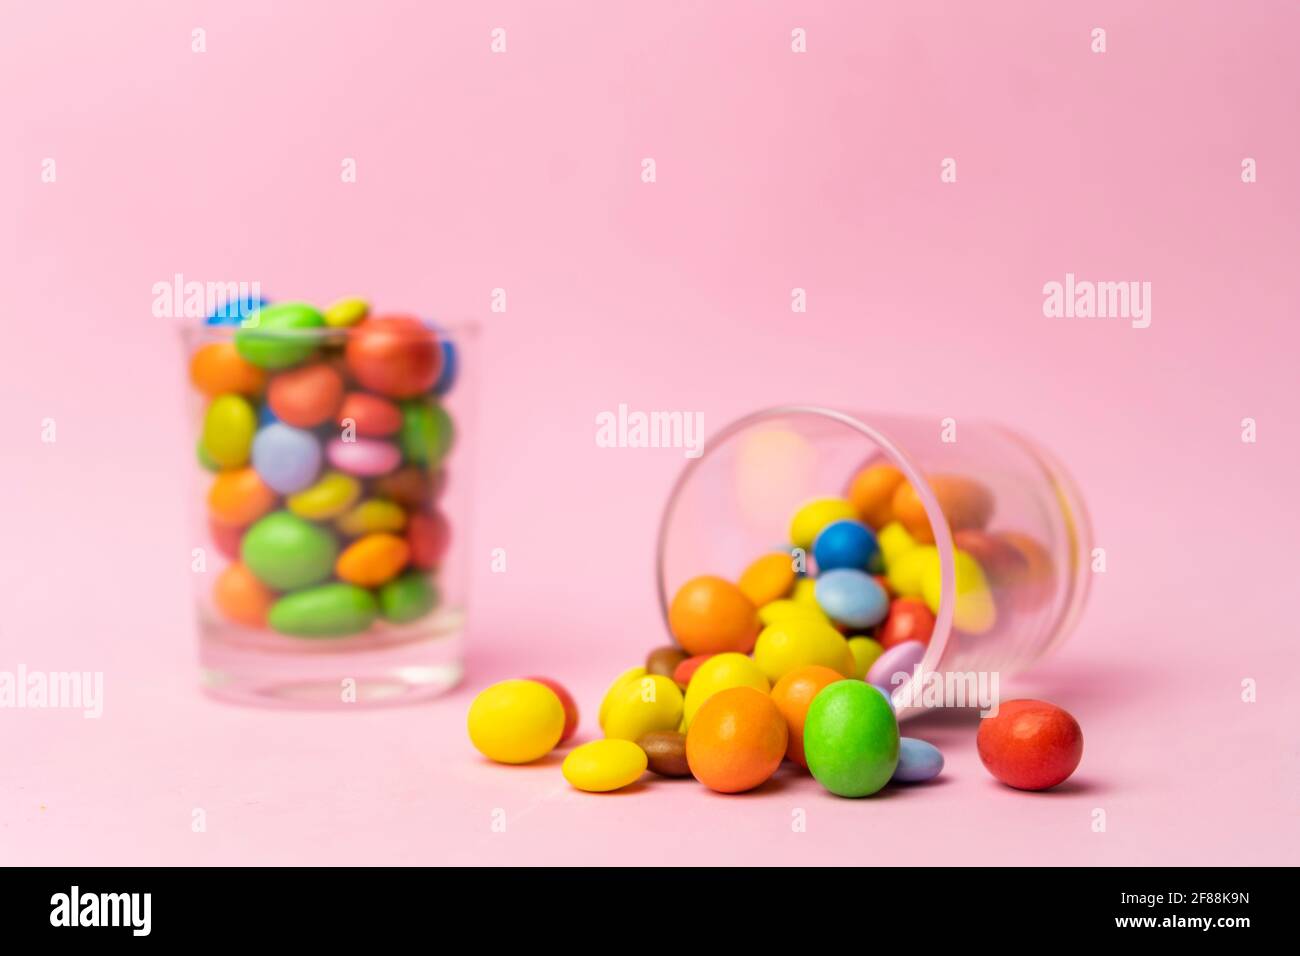 Multicolored chocolate candies in glass jar on blue vintage wooden background.Colorful sweets background concept with copy space for text. Stock Photo